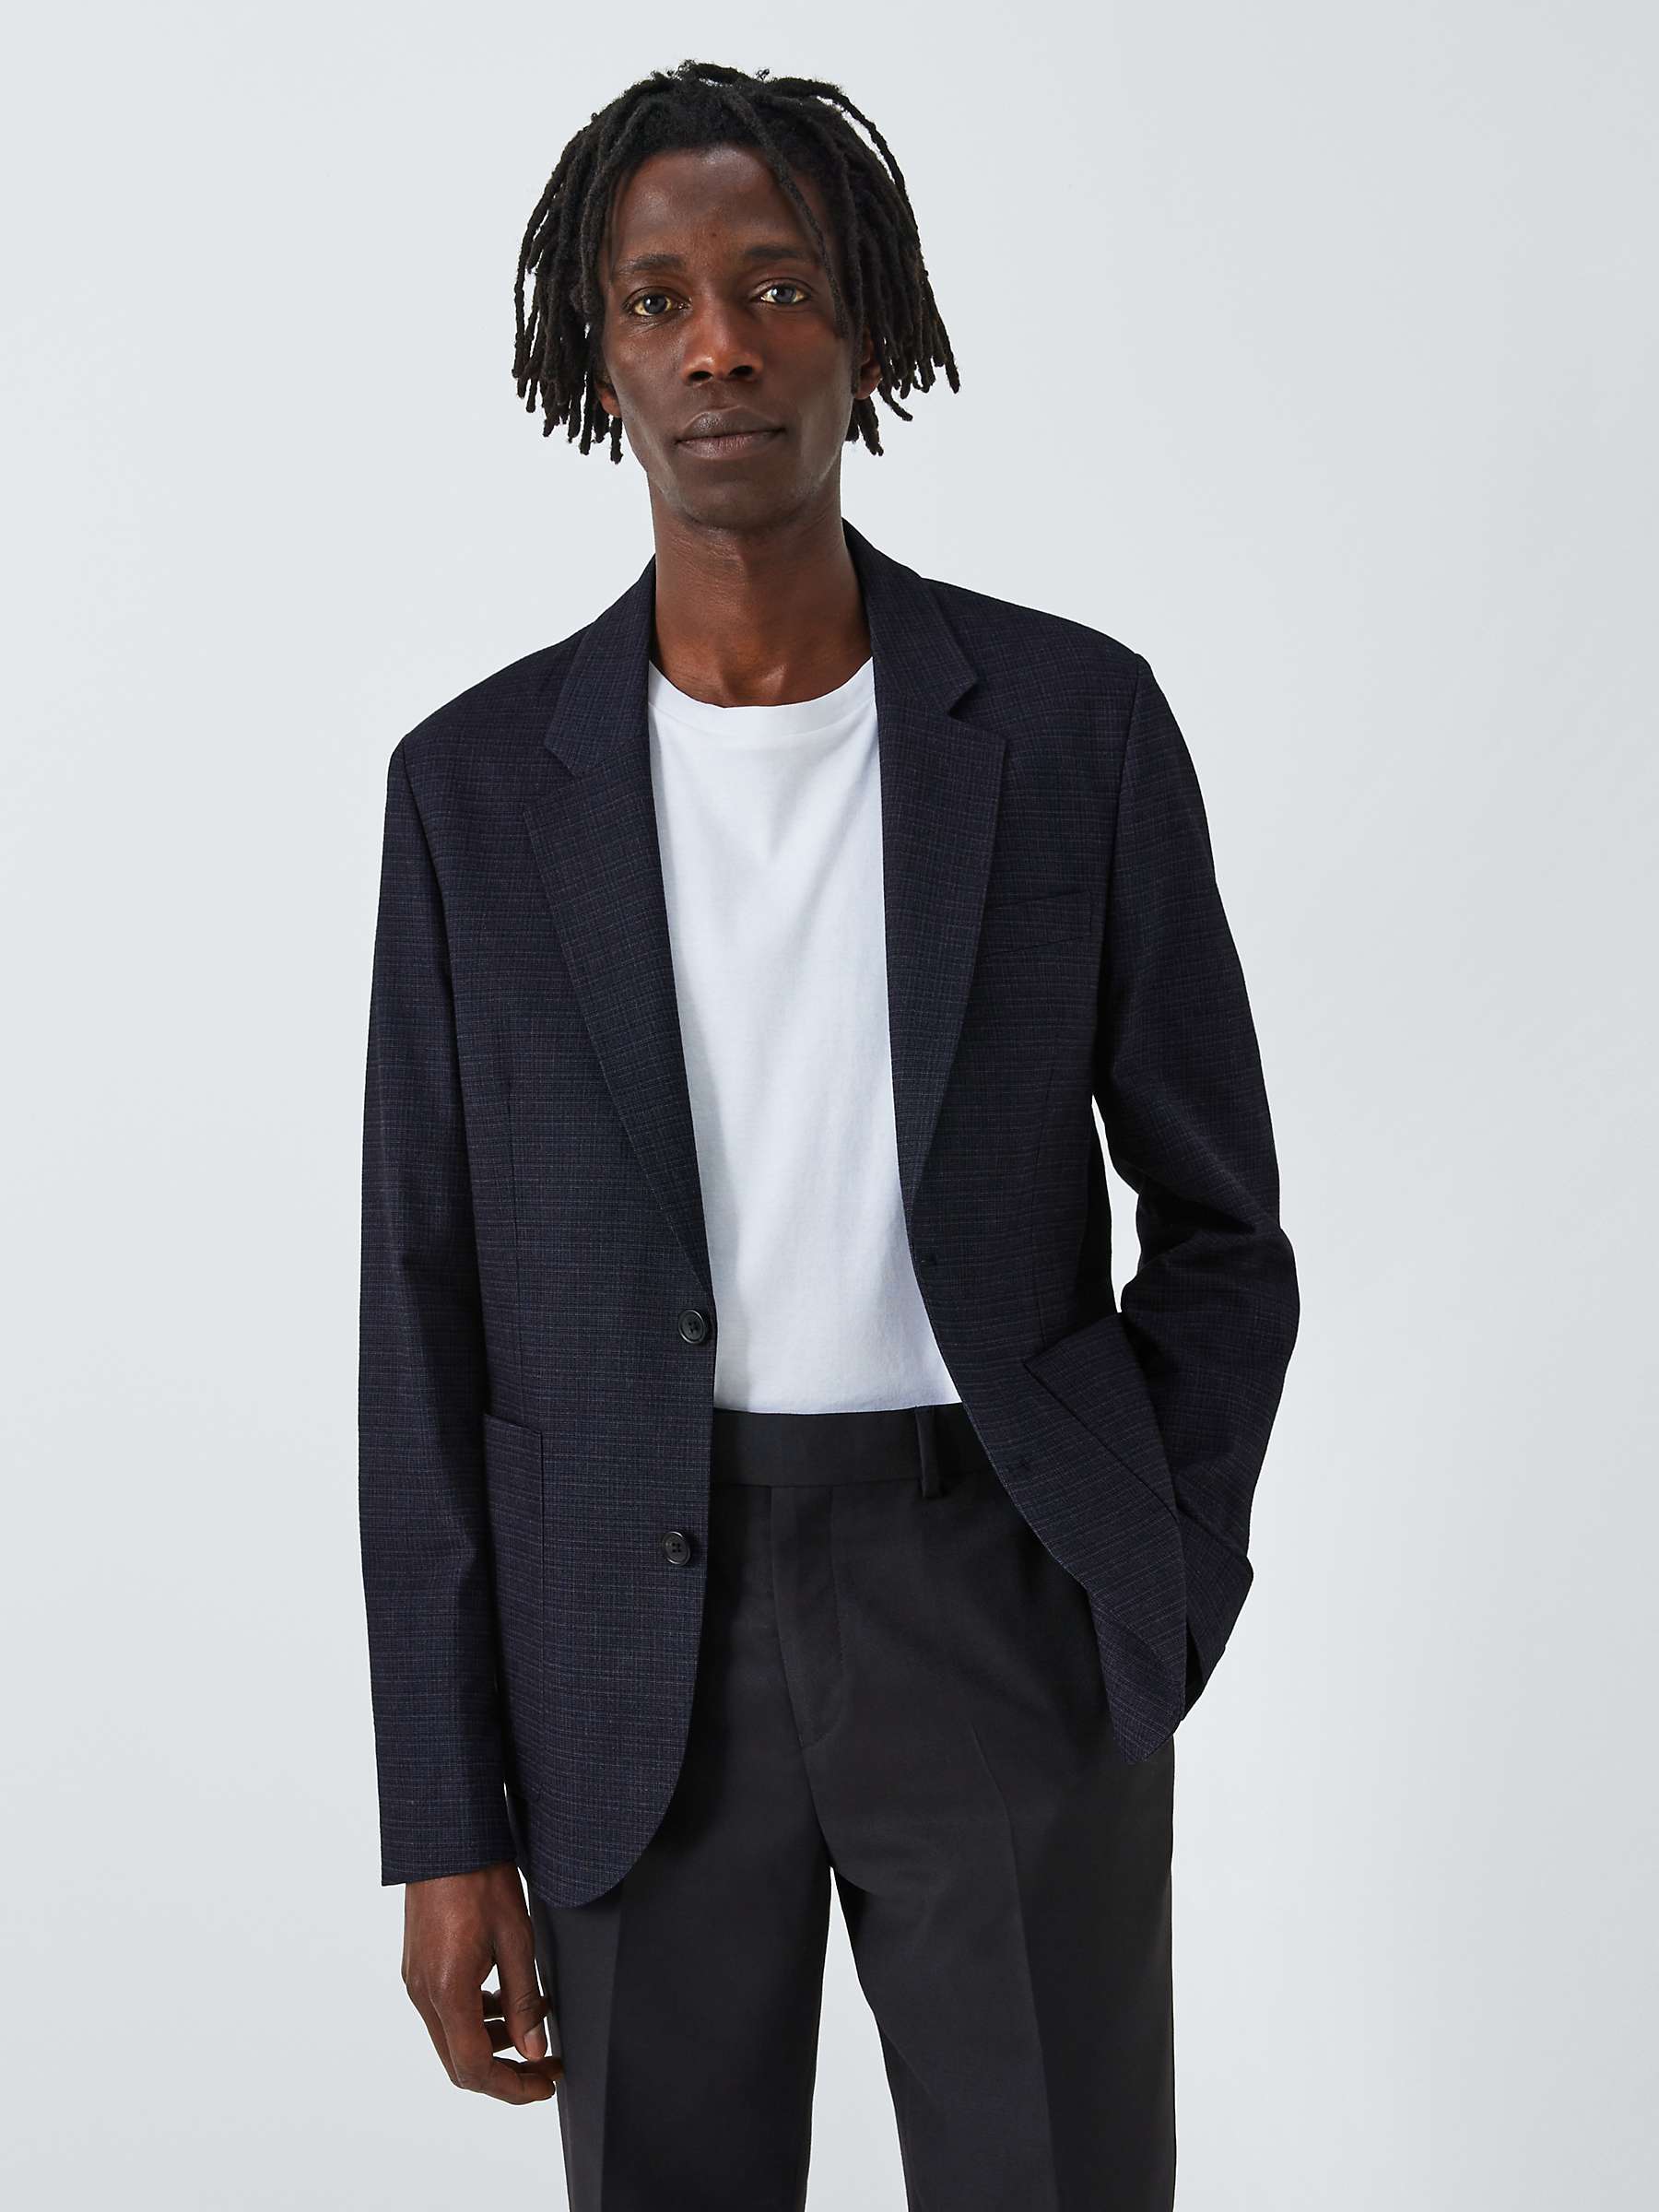 Buy Paul Smith Unlined Textured Suit Jacket, 49 Blues Online at johnlewis.com